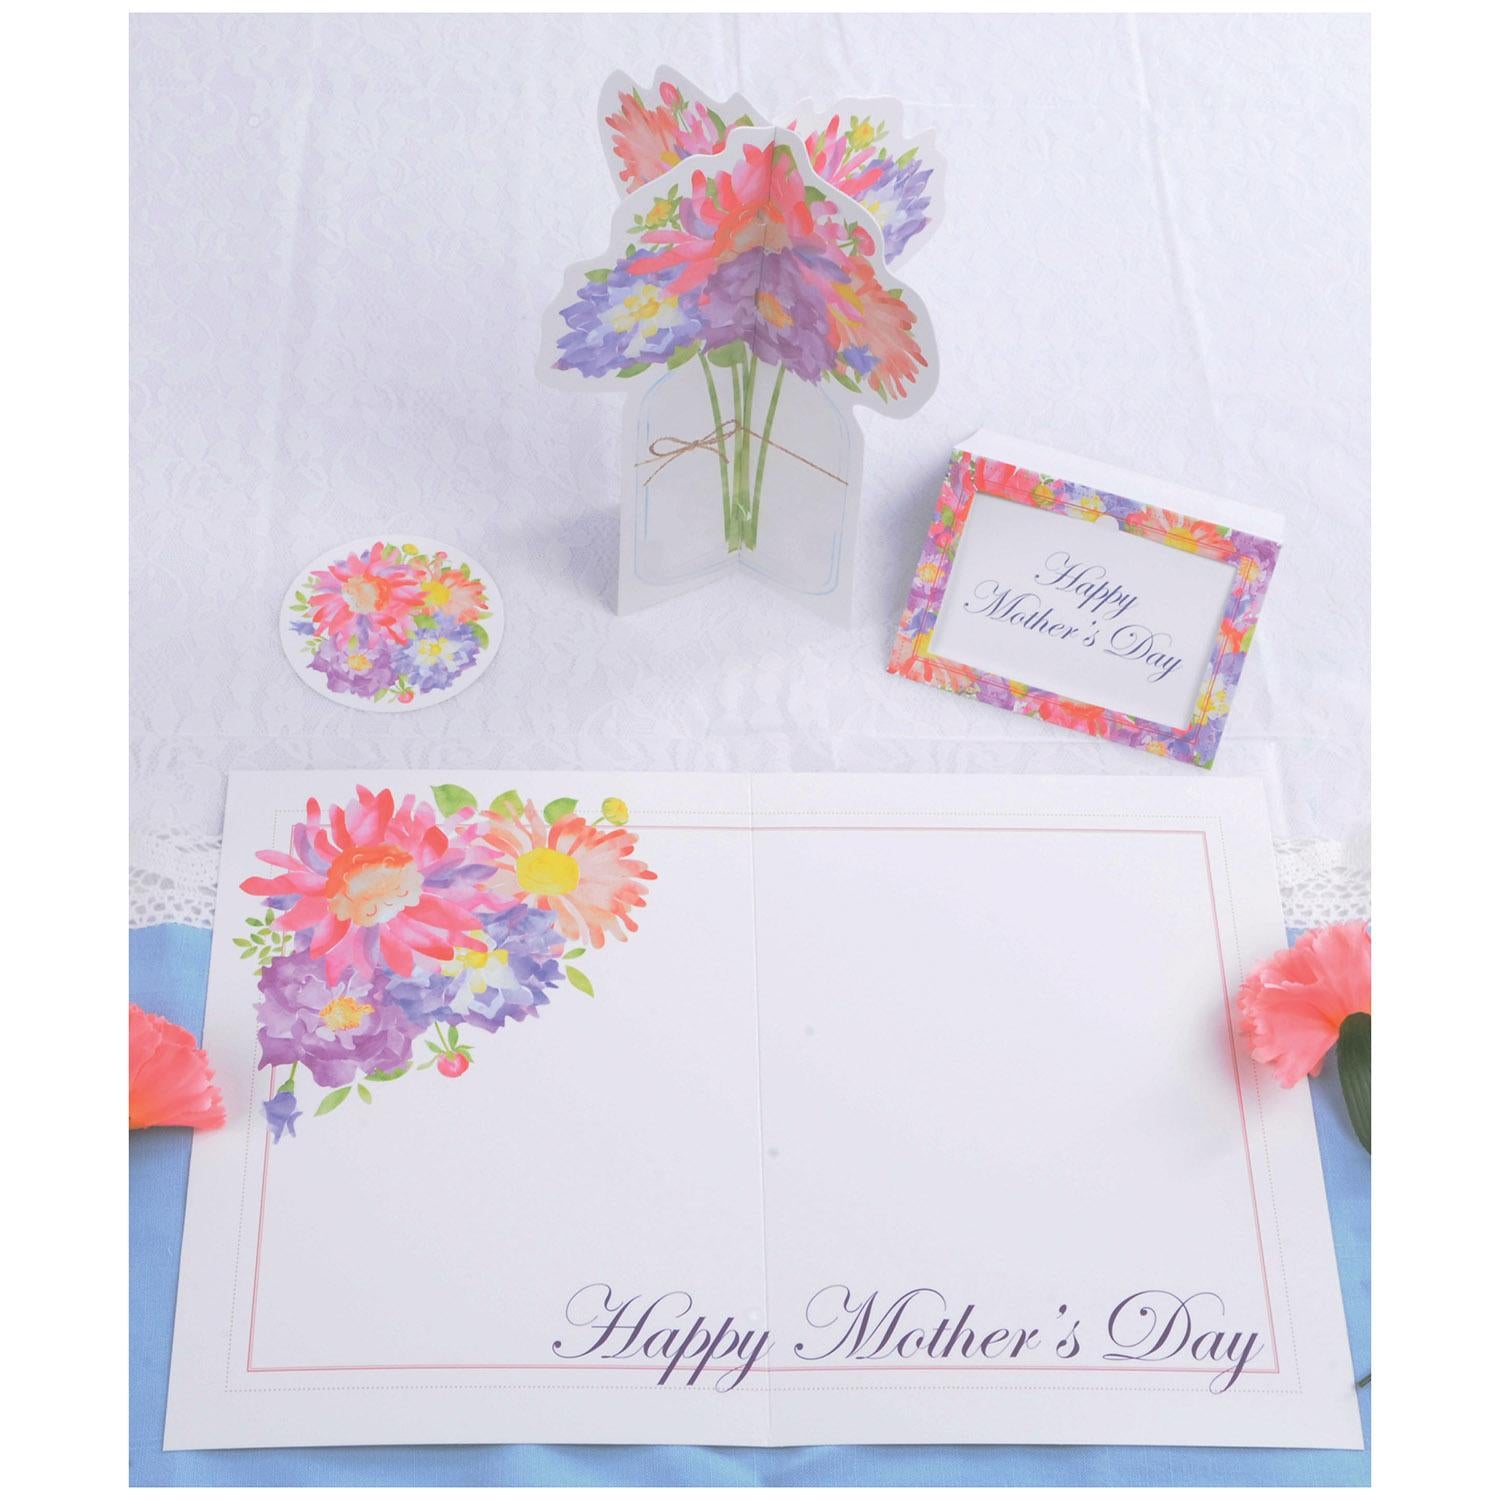 Beistle Mother's Day Place Setting Kit (4/Pkg)